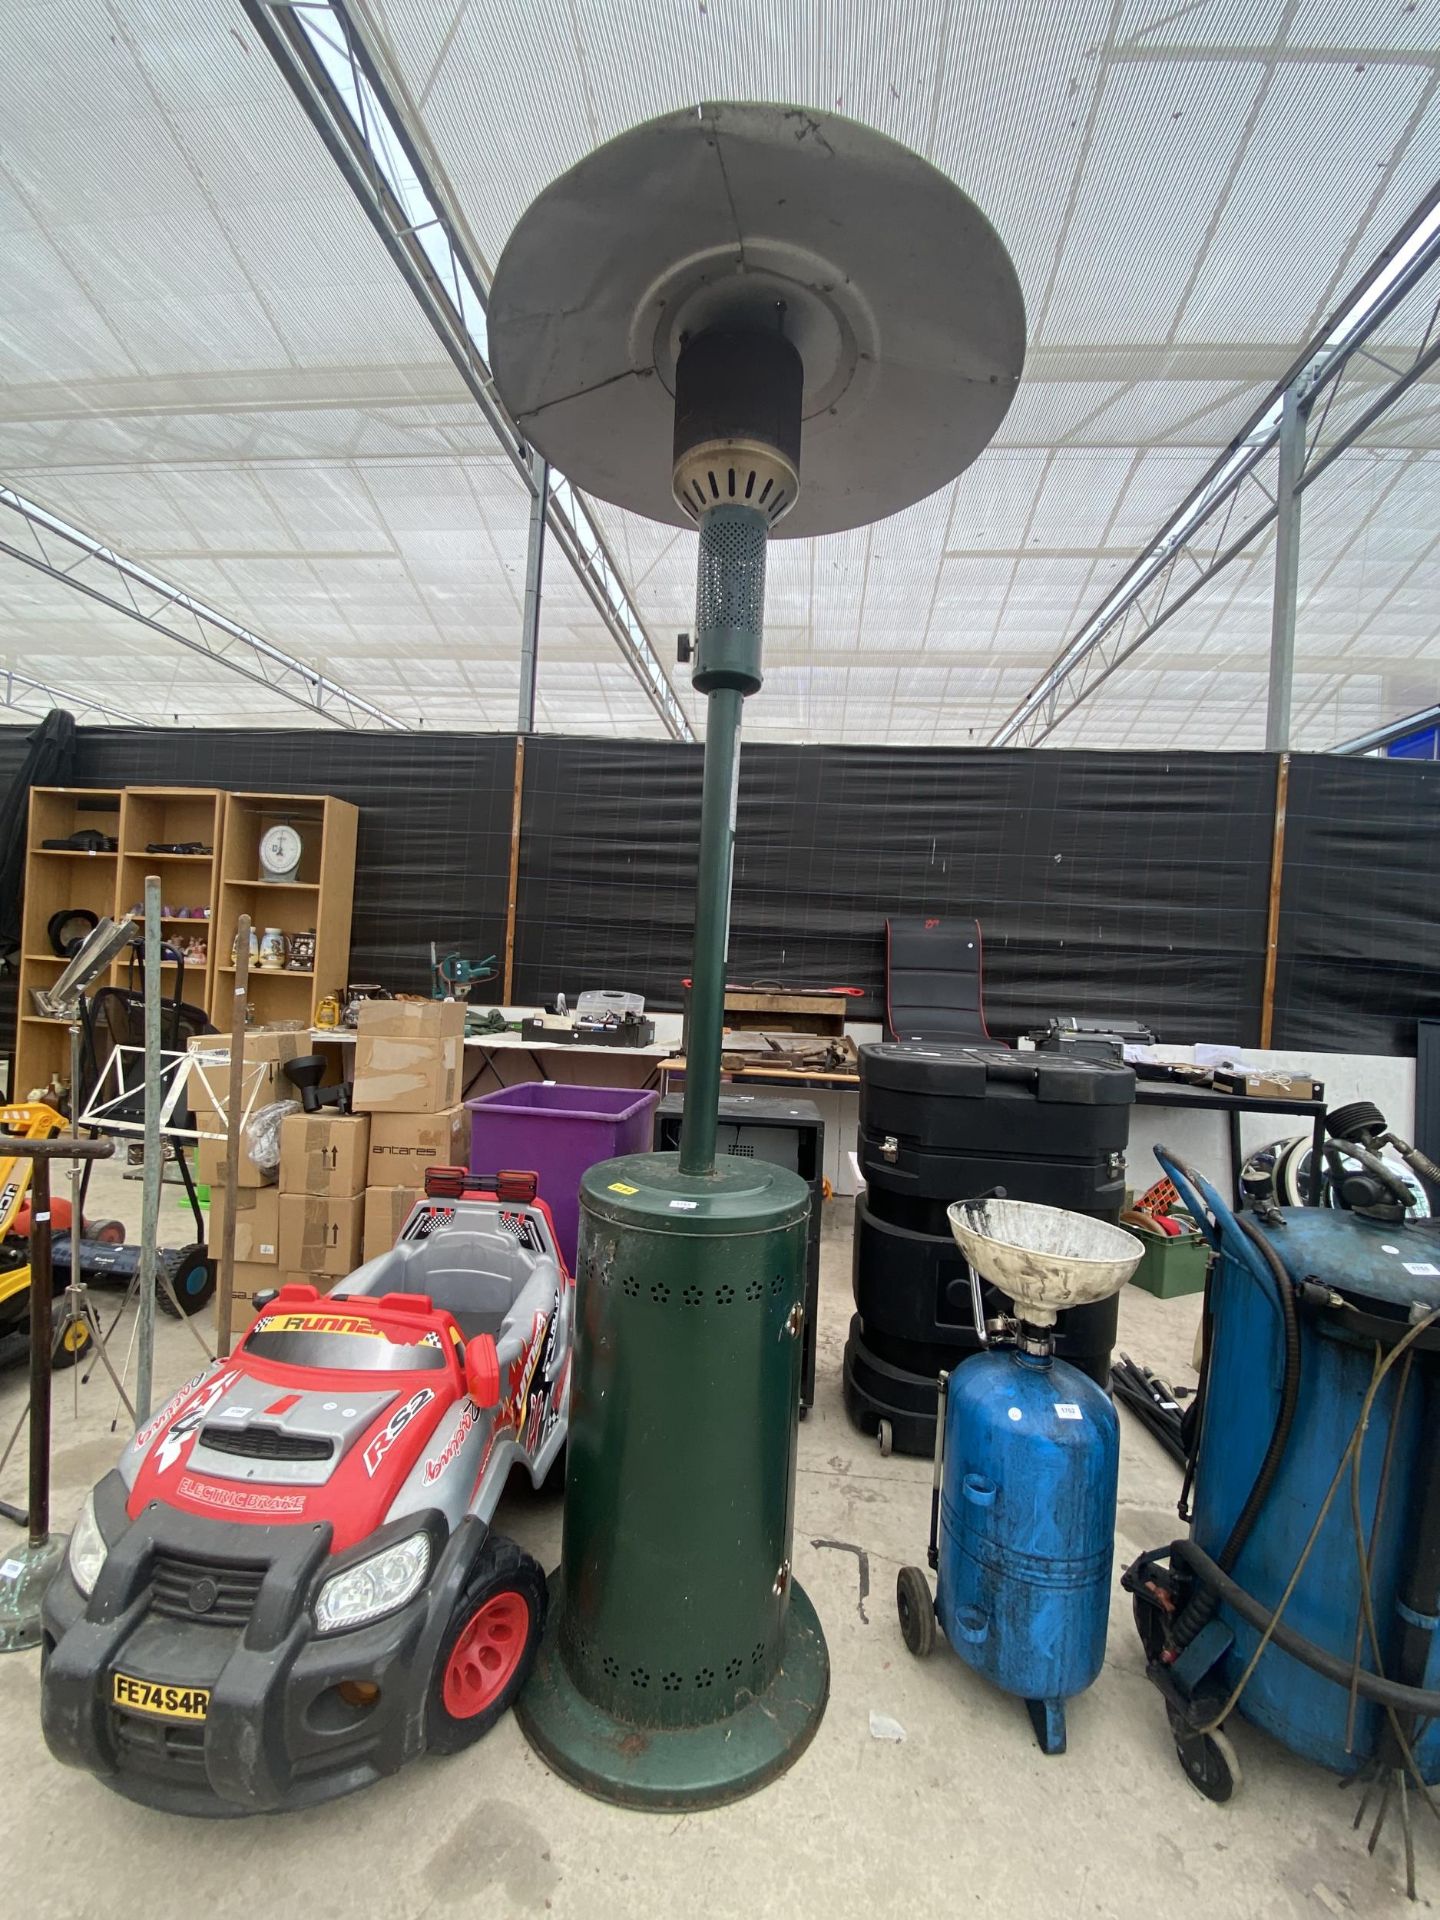 A LARGE GAS PATIO HEATER